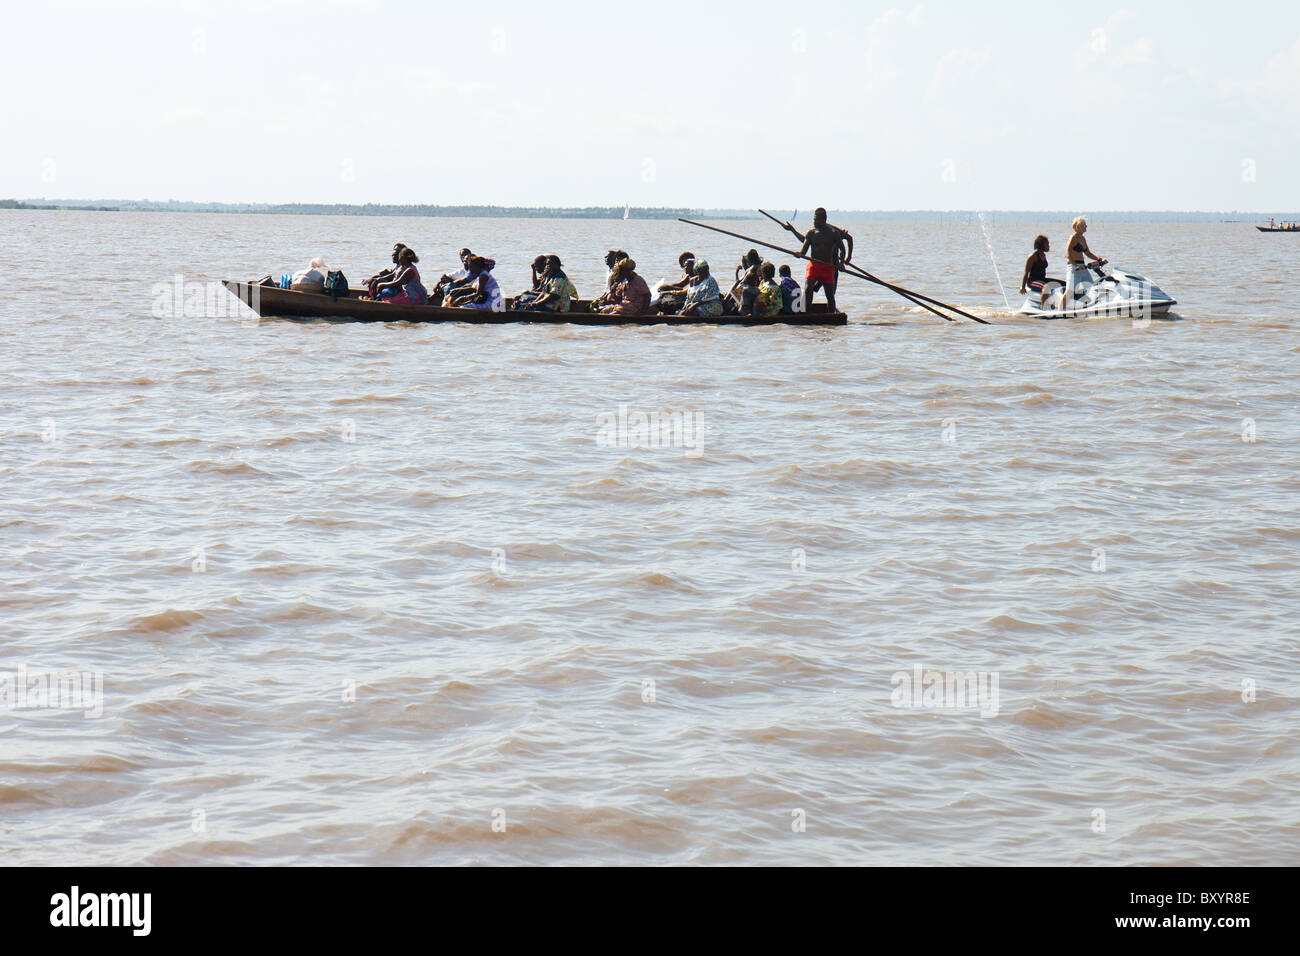 A traditional West African canoe transports villagers from Togoville across Lac Togo while a modern jet ski zips by. Stock Photo